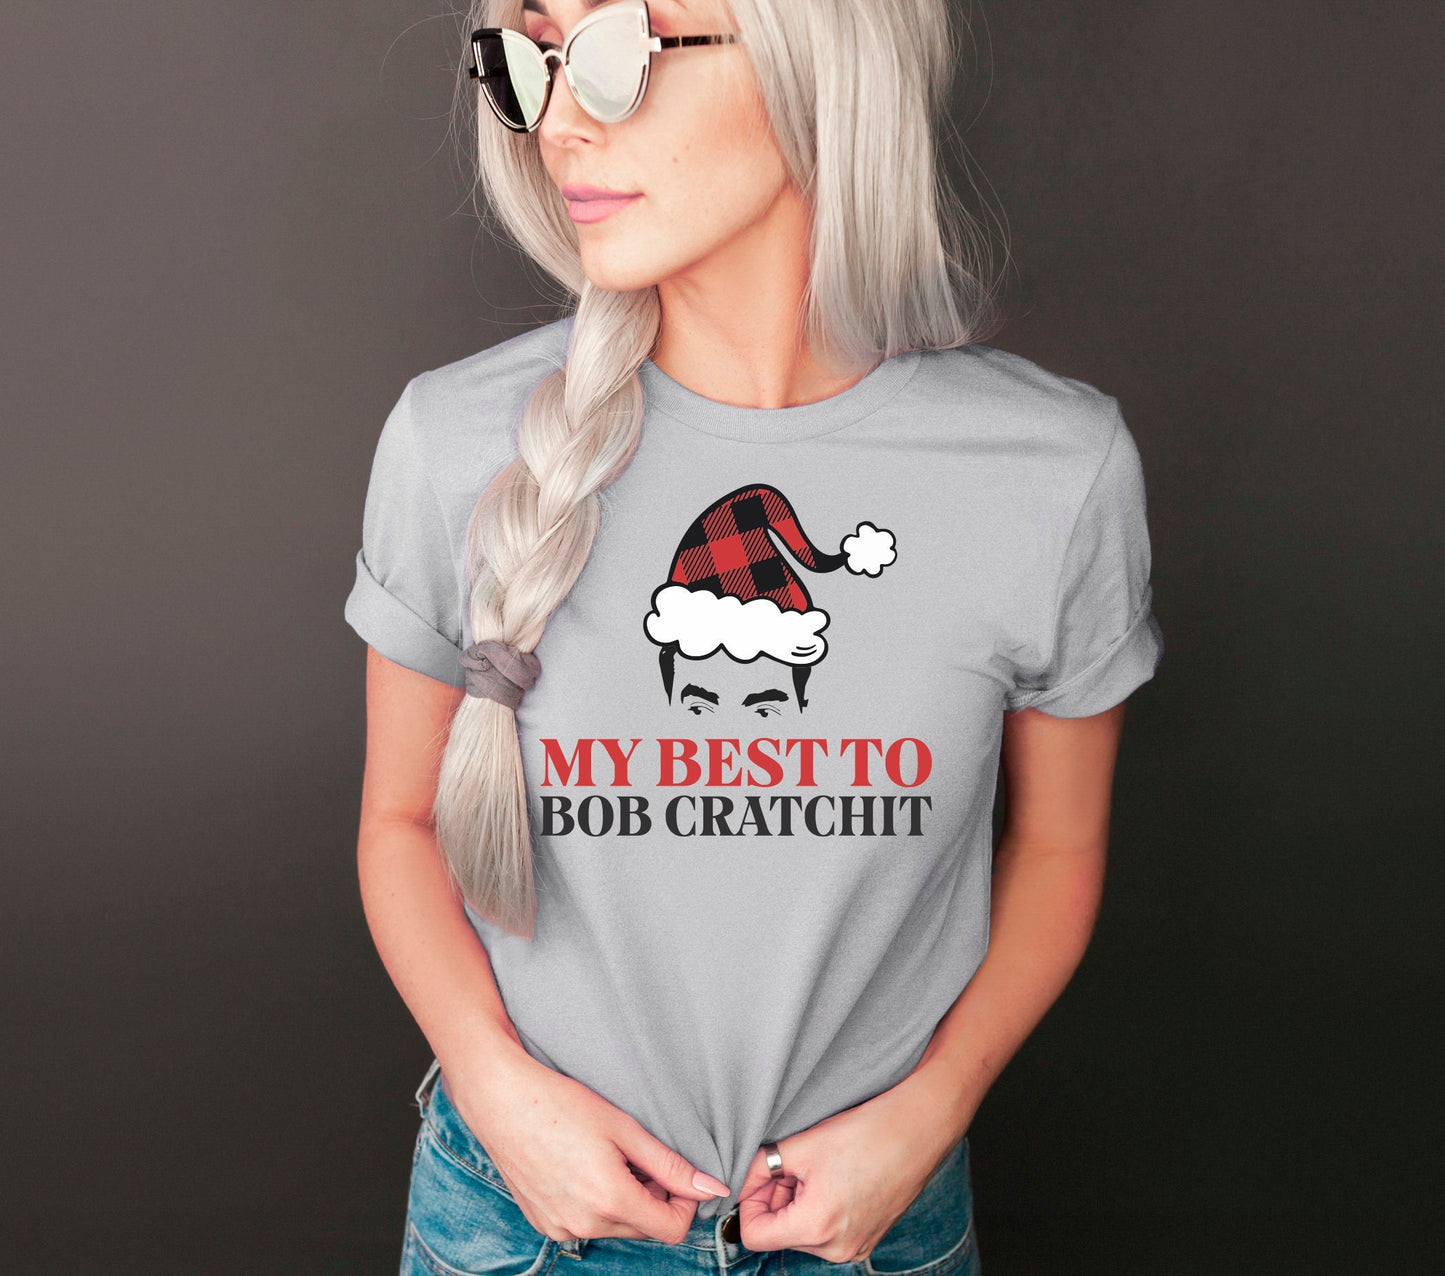 My Best To Bob Cratchit, Best Wishes Warmest Regards, Bebe Its Cold Outside, Ugly Christmas Shirt, David Xmas Moira Quote, Creek Shirt